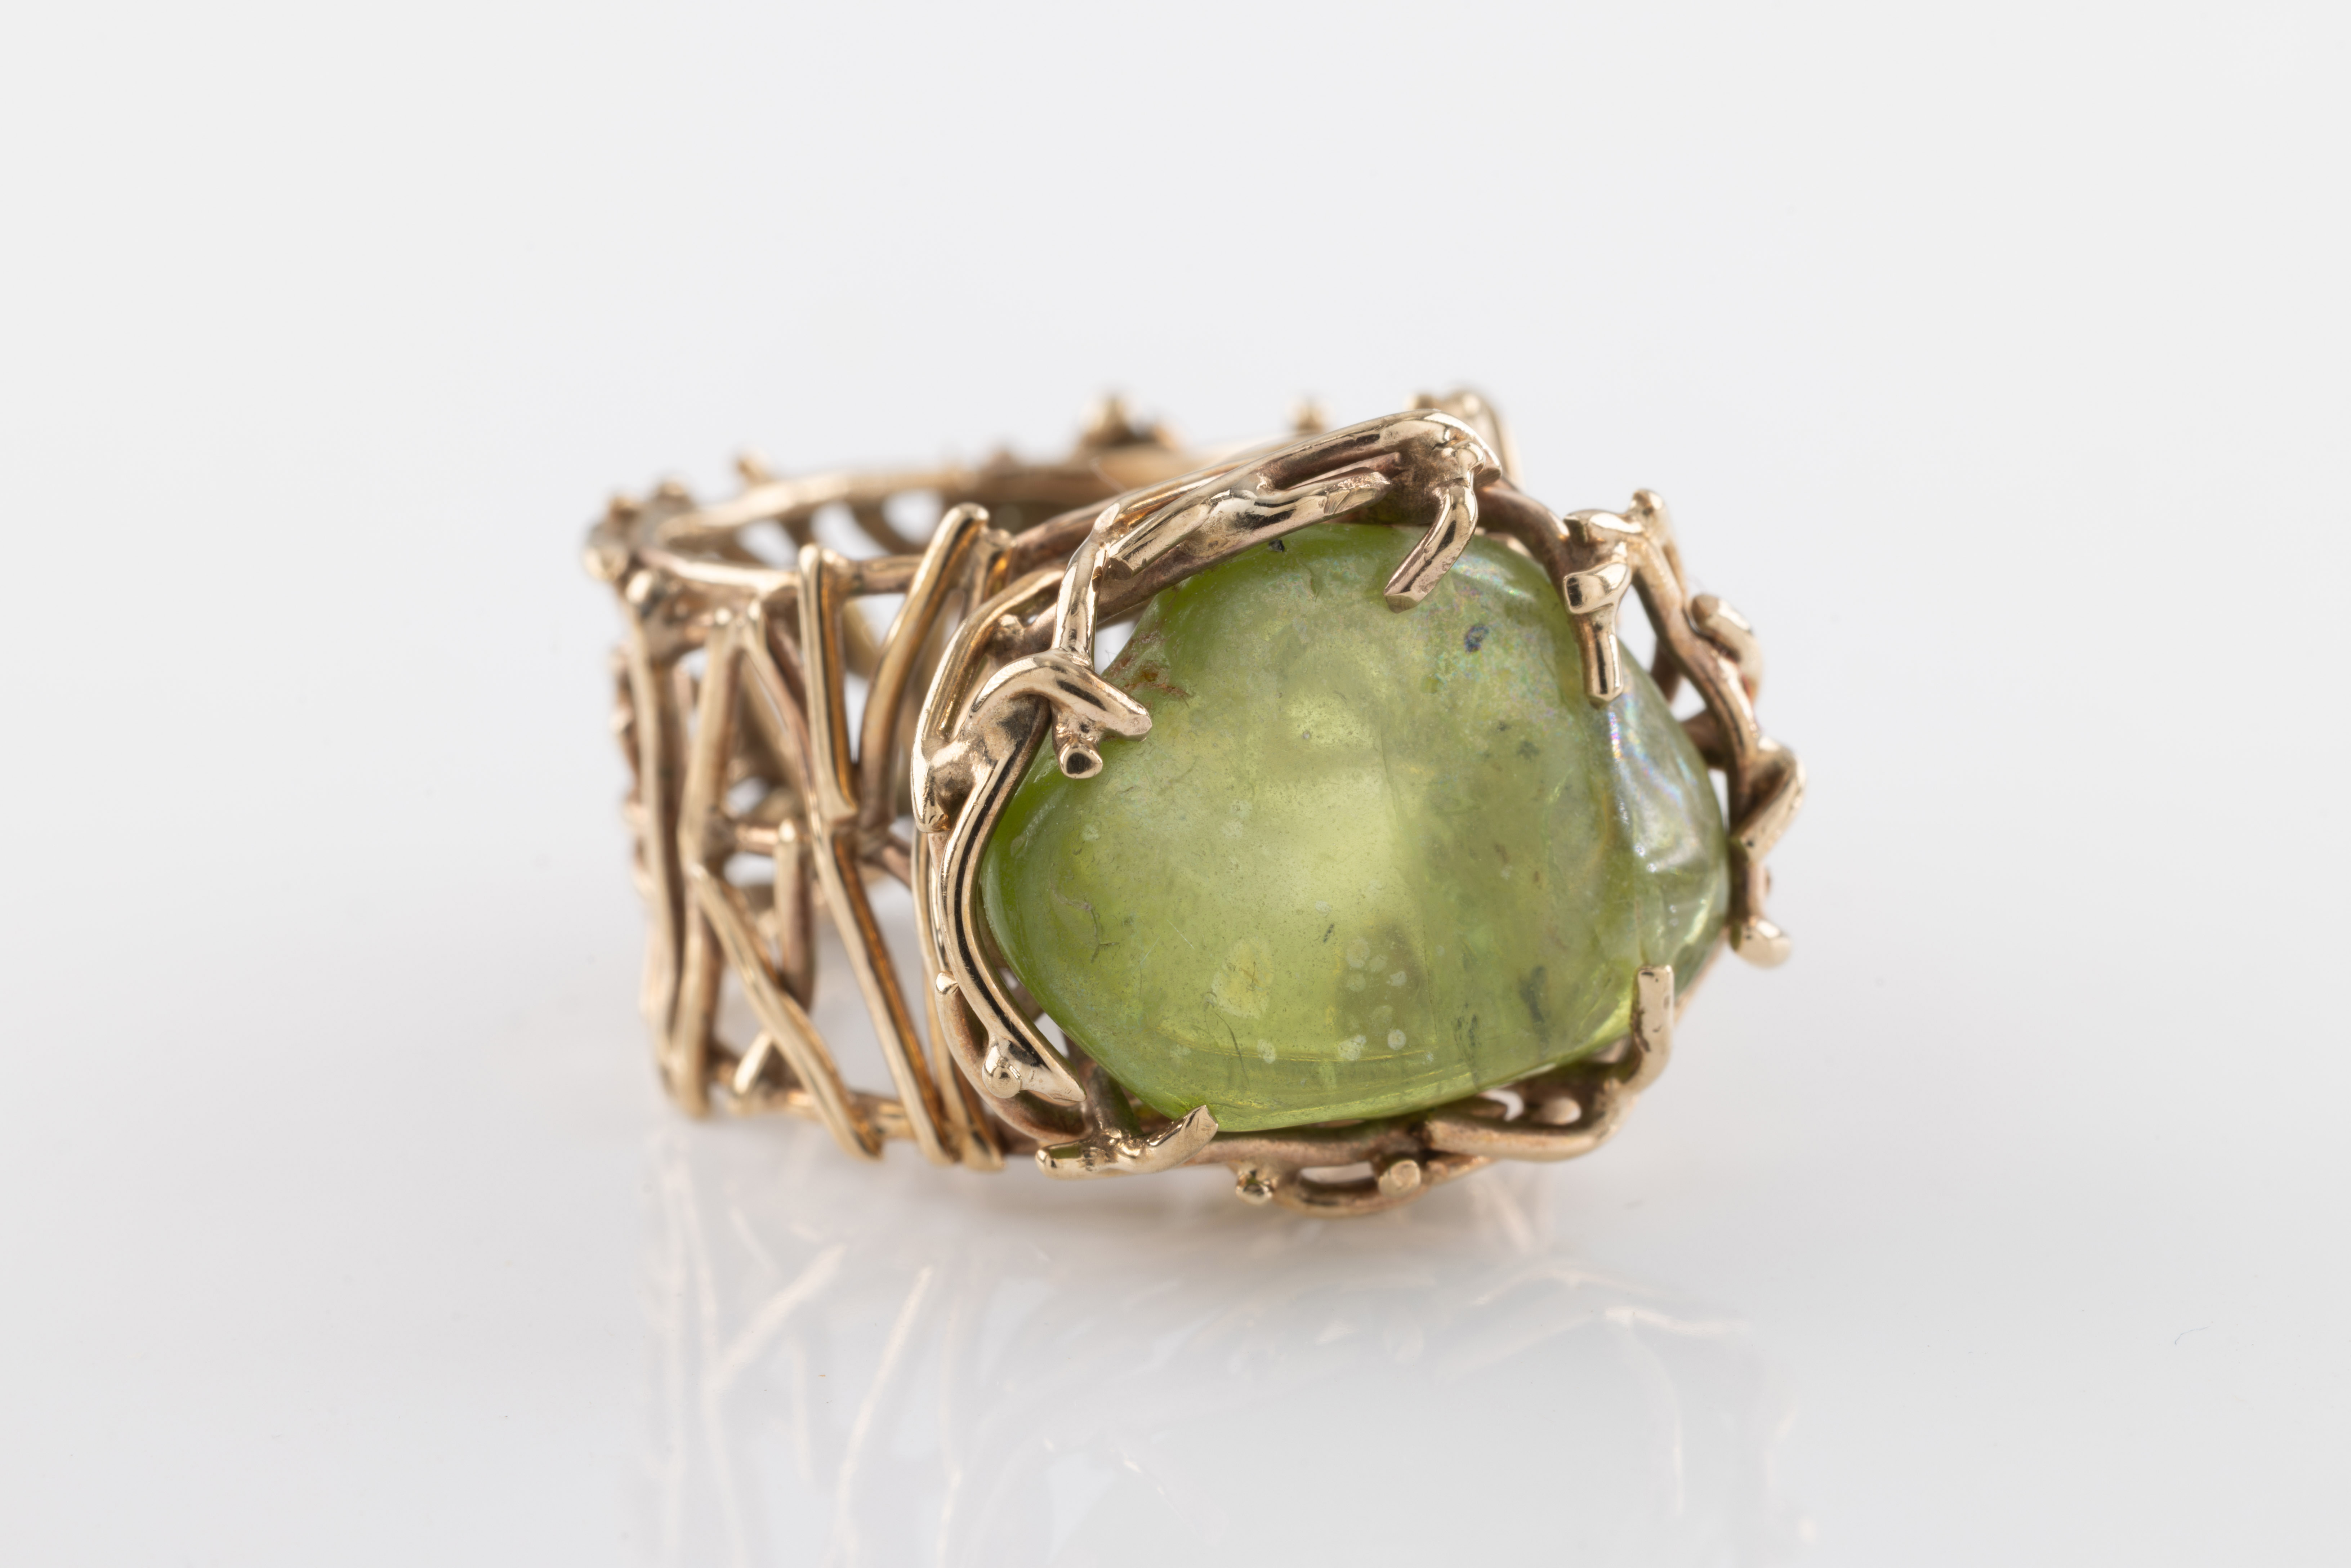 A green stone and yellow metal ring